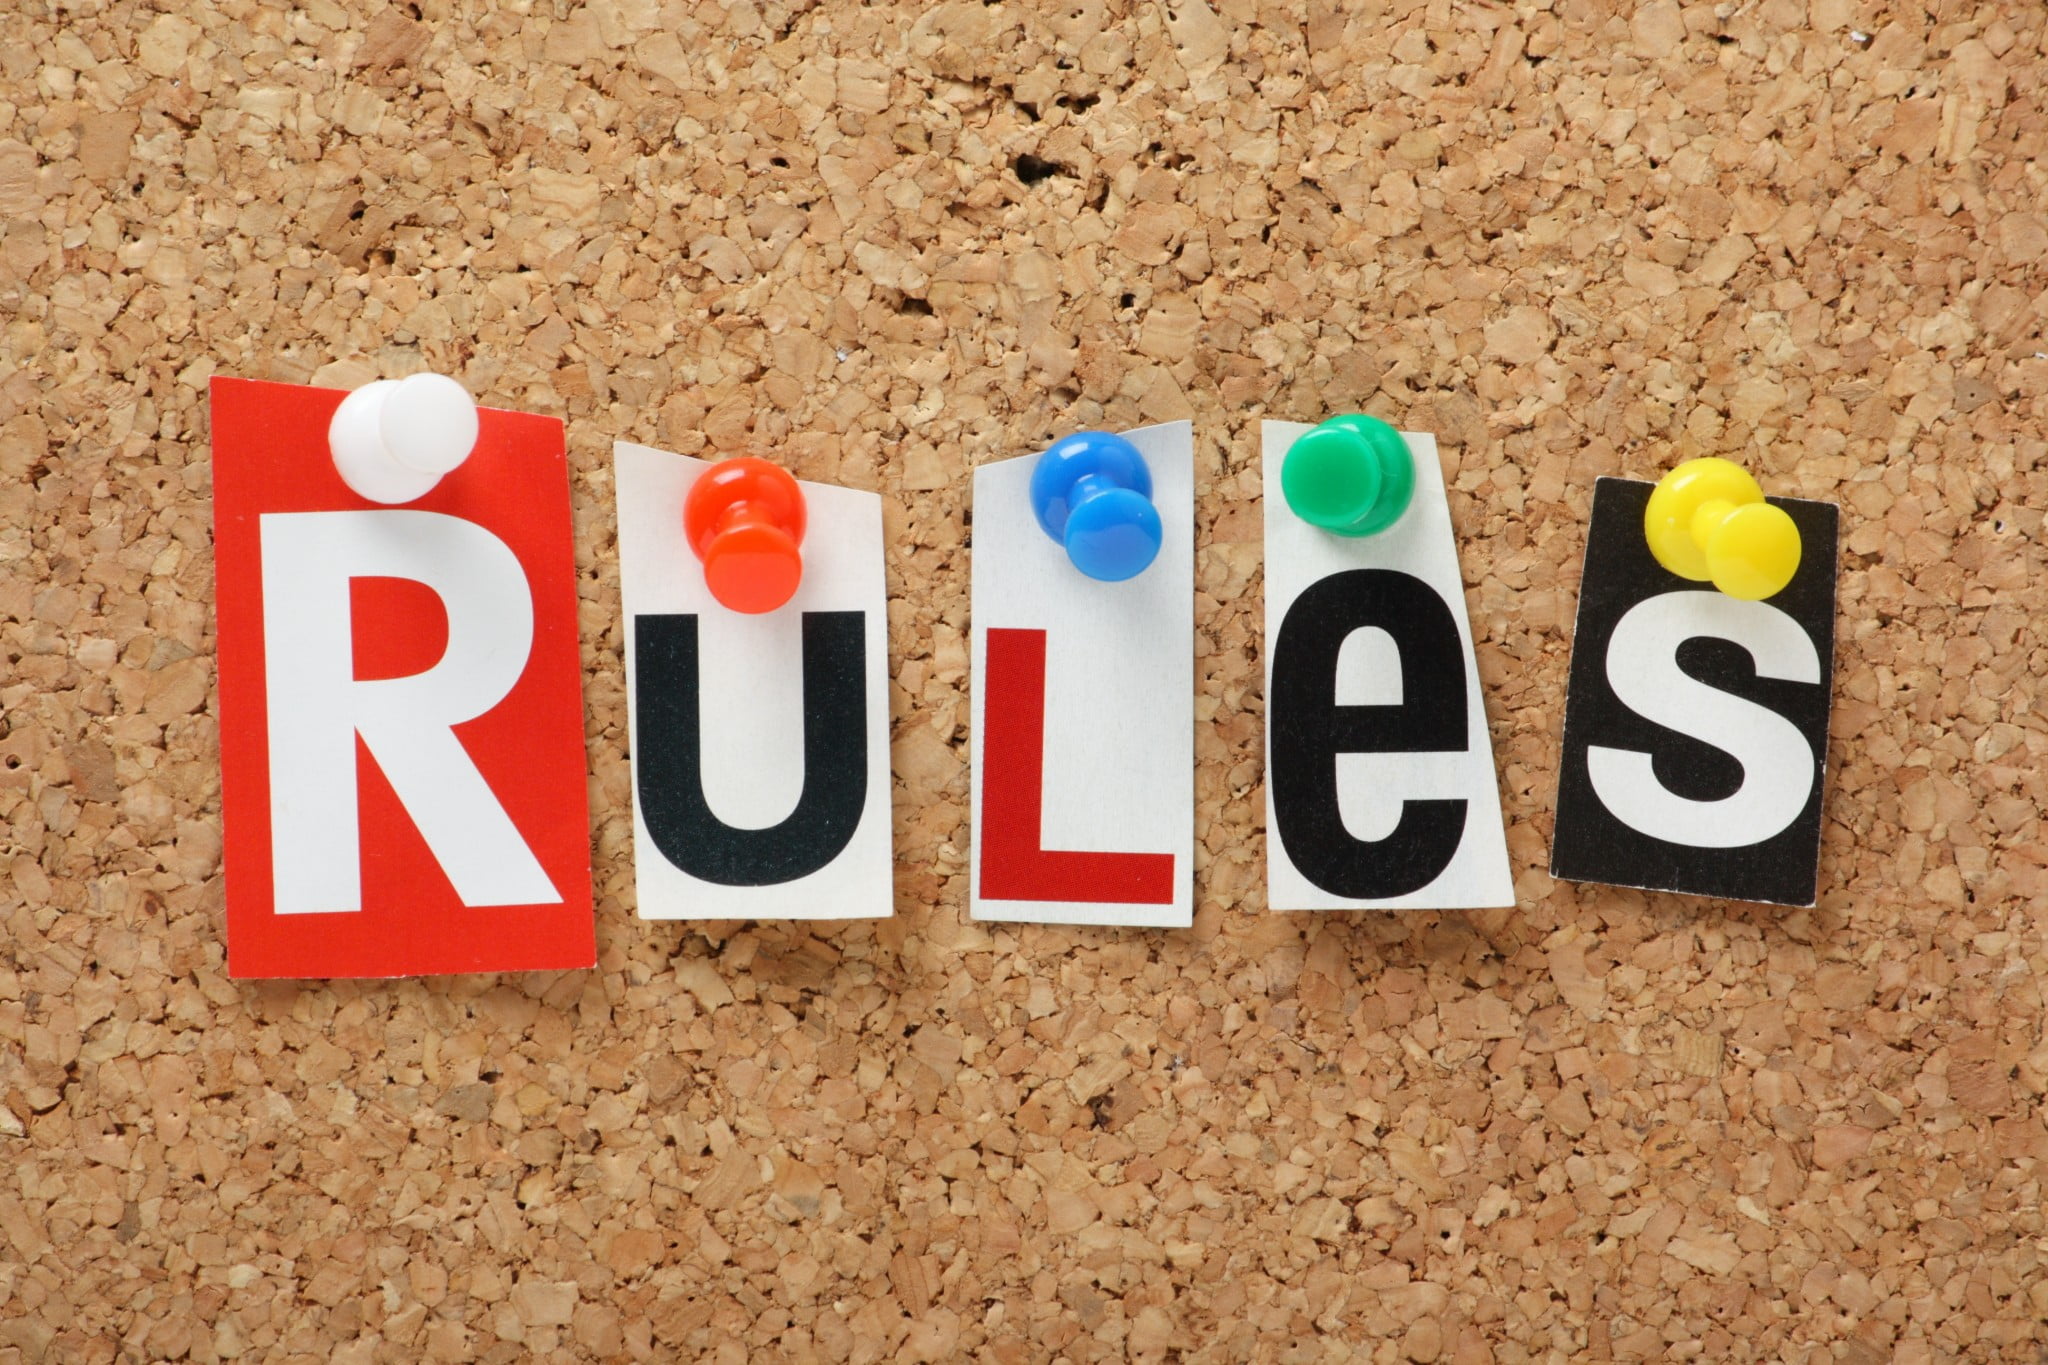 "rules" spelled out on corkboard